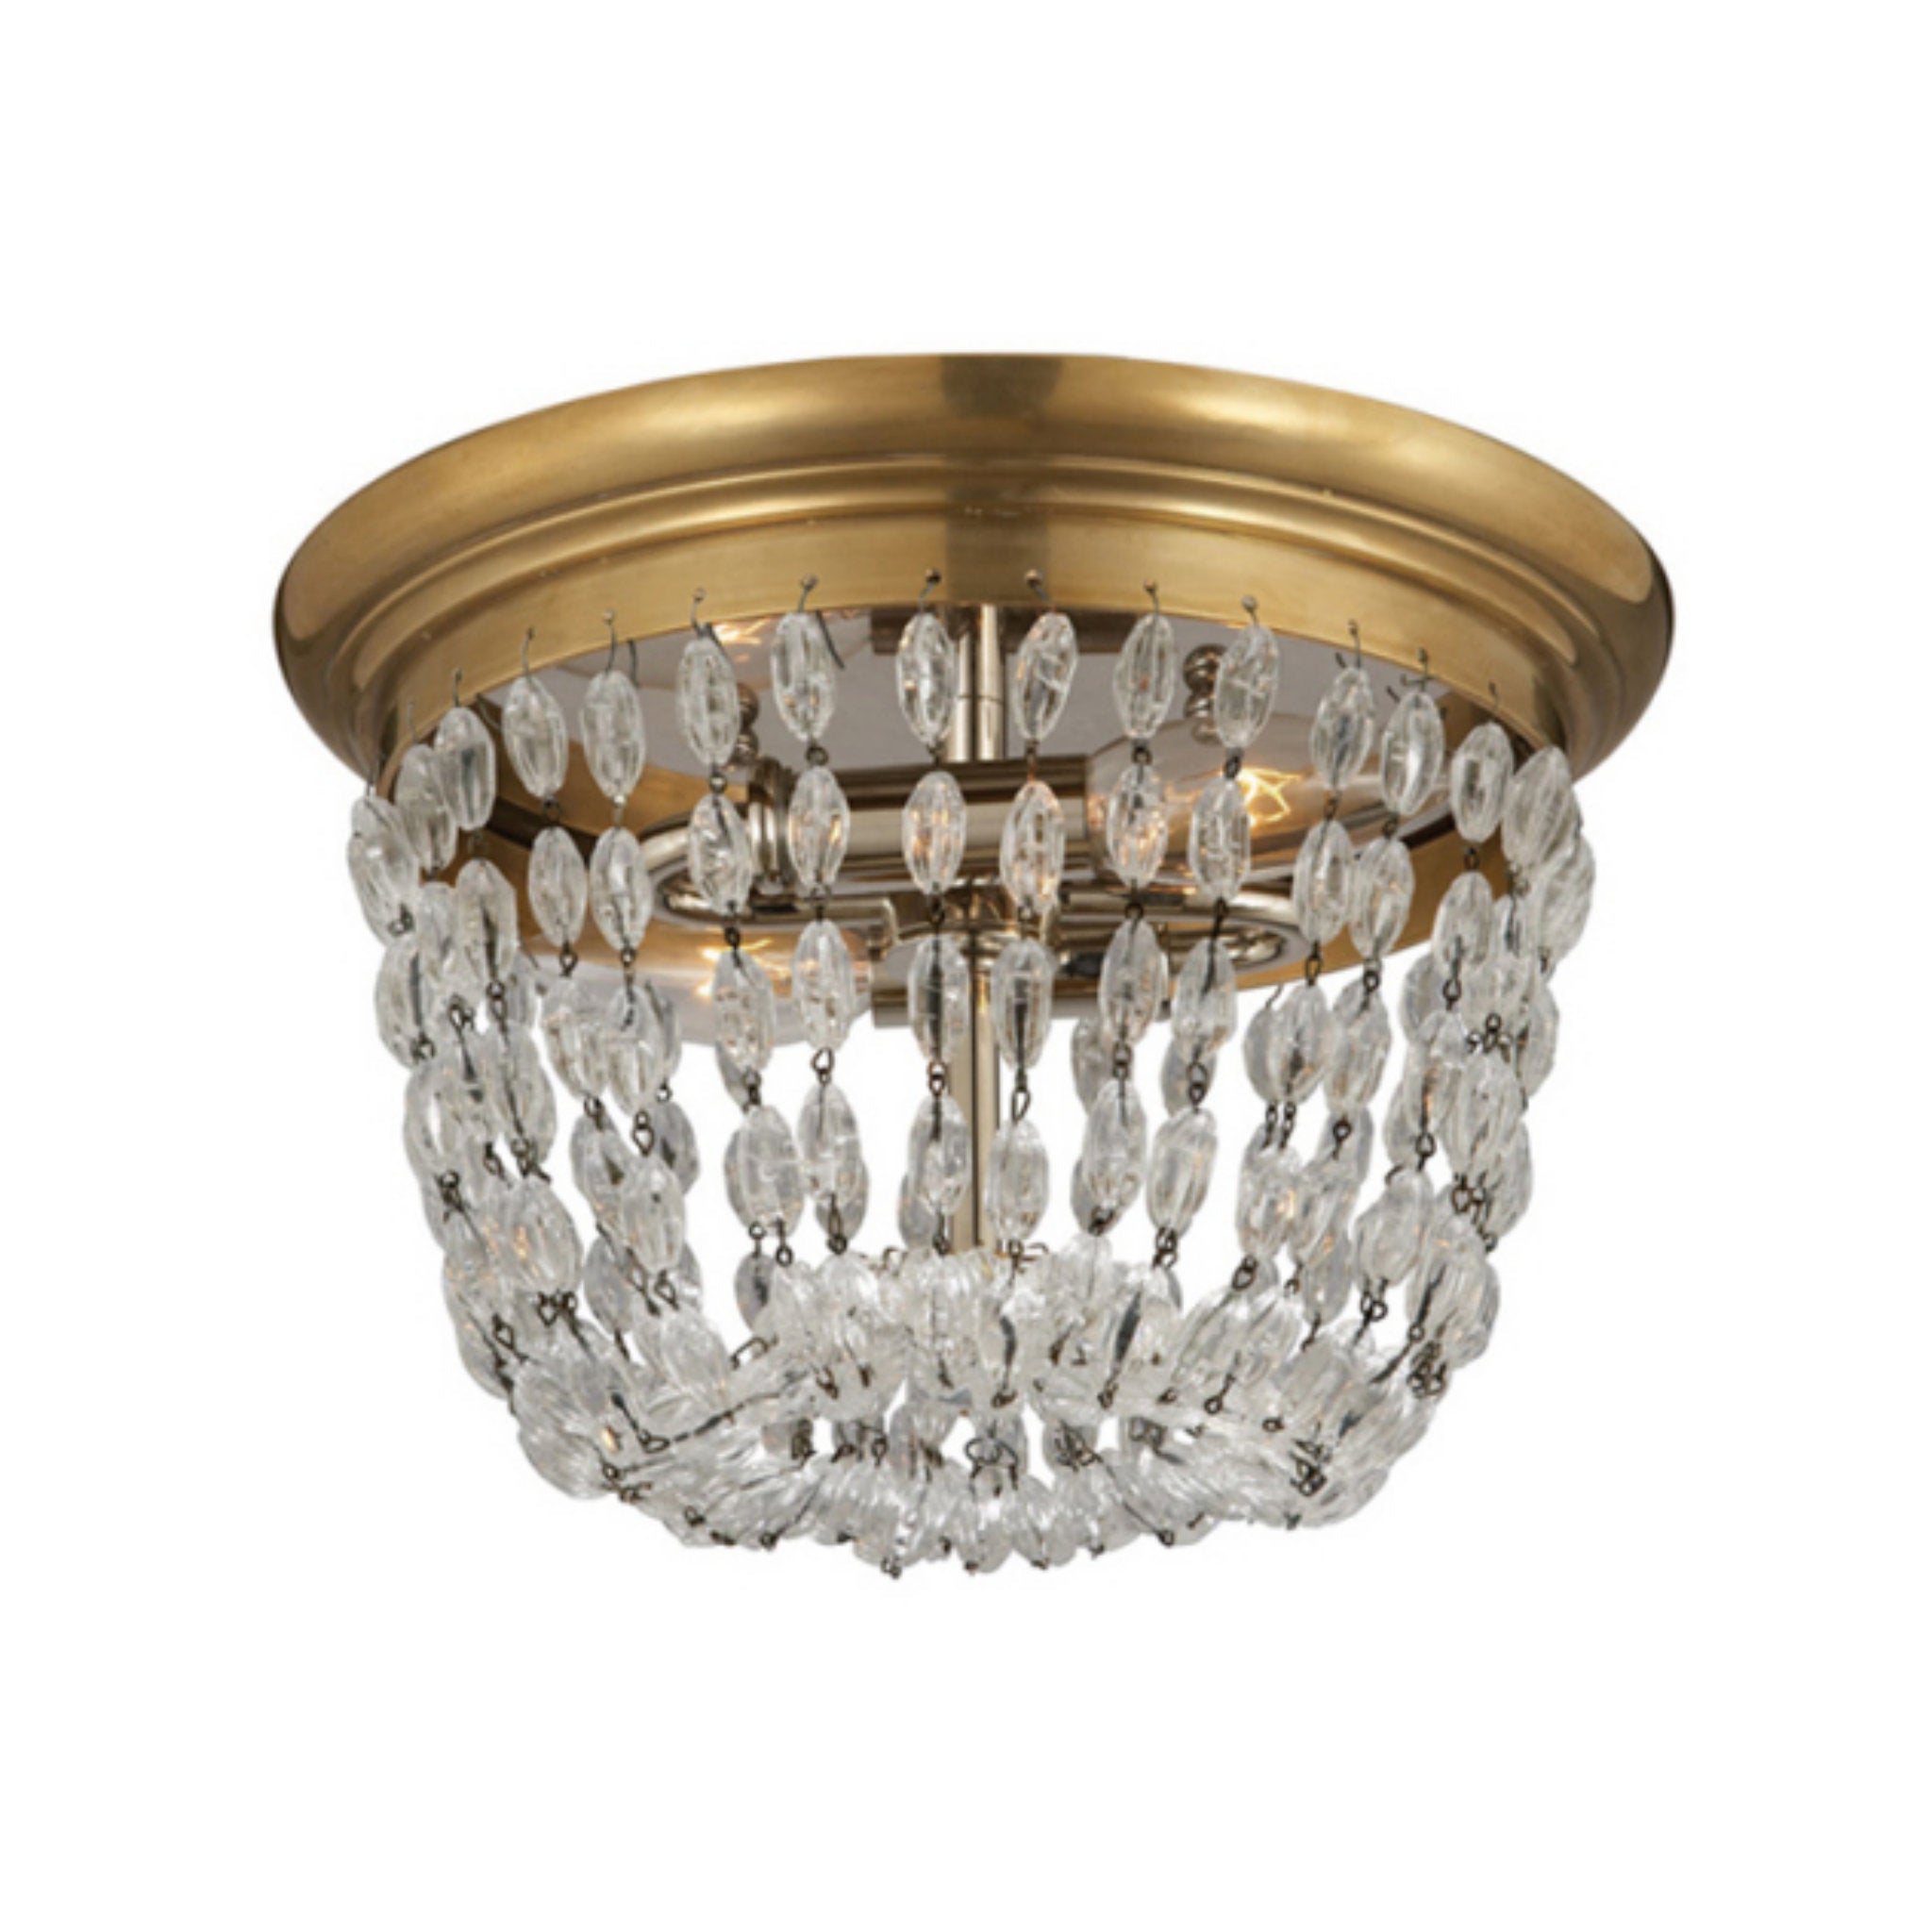 Chapman & Myers Paris Flea Market Small Flush Mount in Antique-Burnished Brass with Seeded Glass